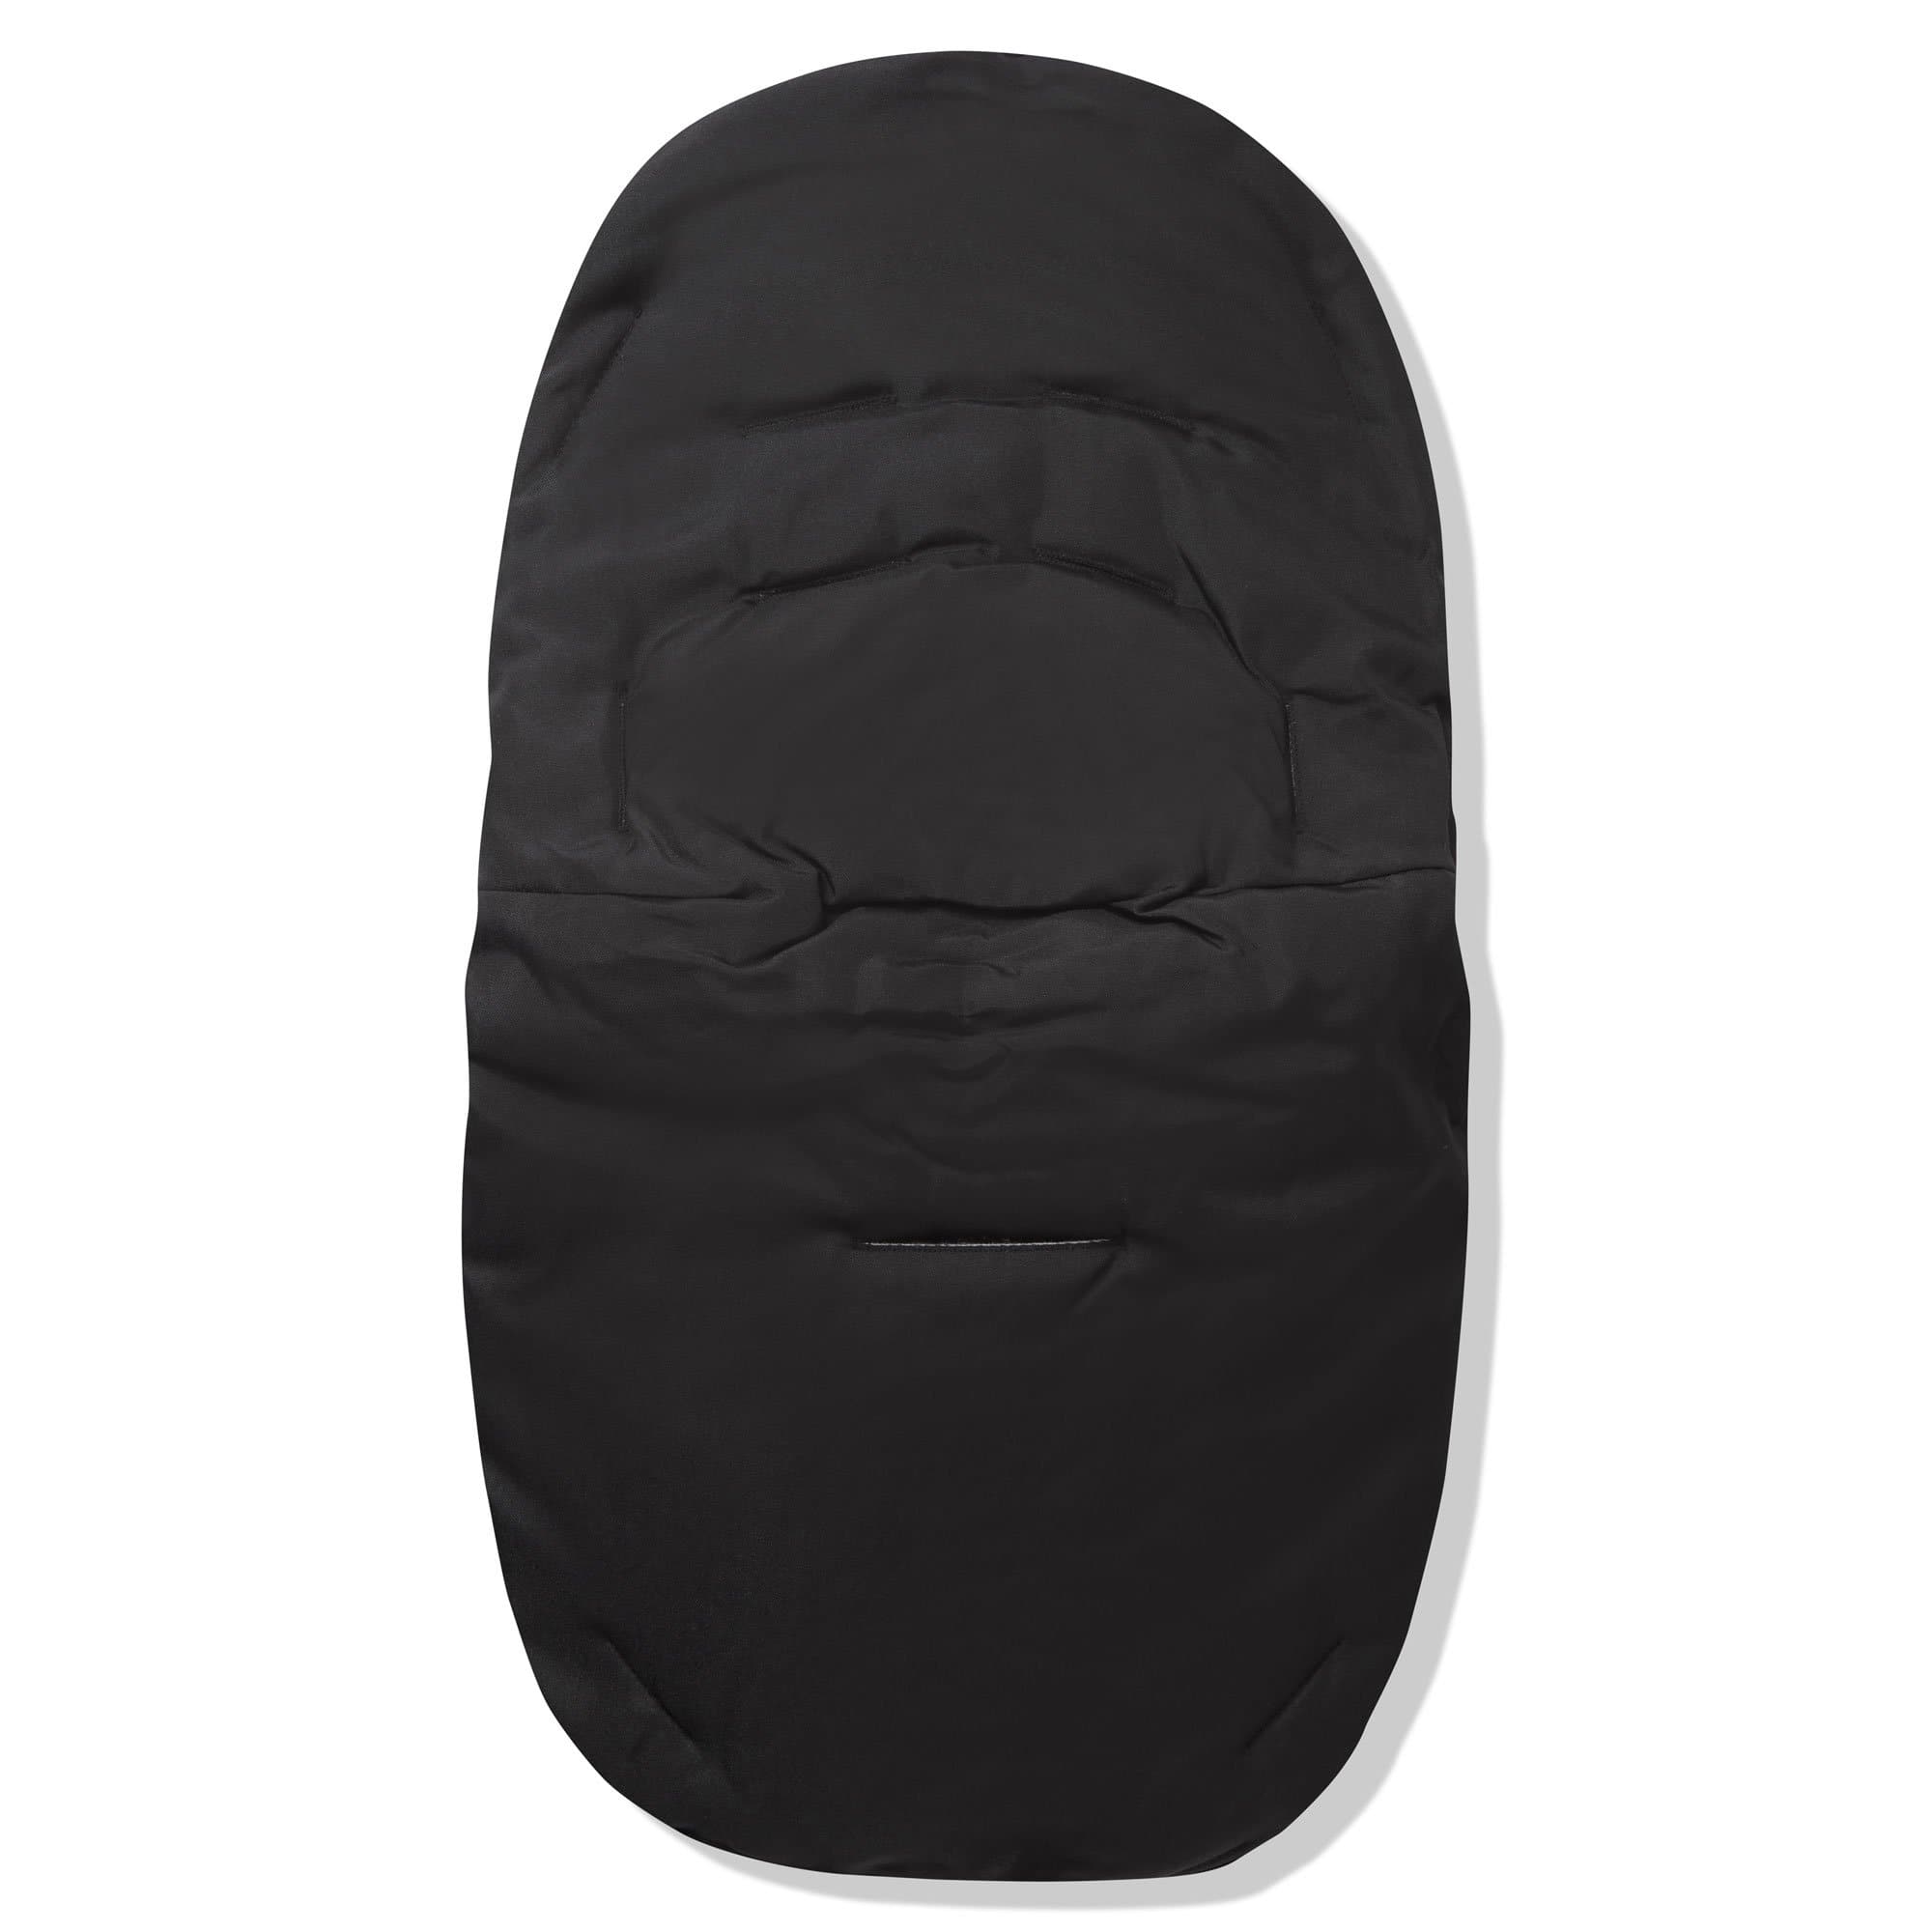 Premium Car Seat Footmuff / Cosy Toes Compatible with Cosatto - For Your Little One